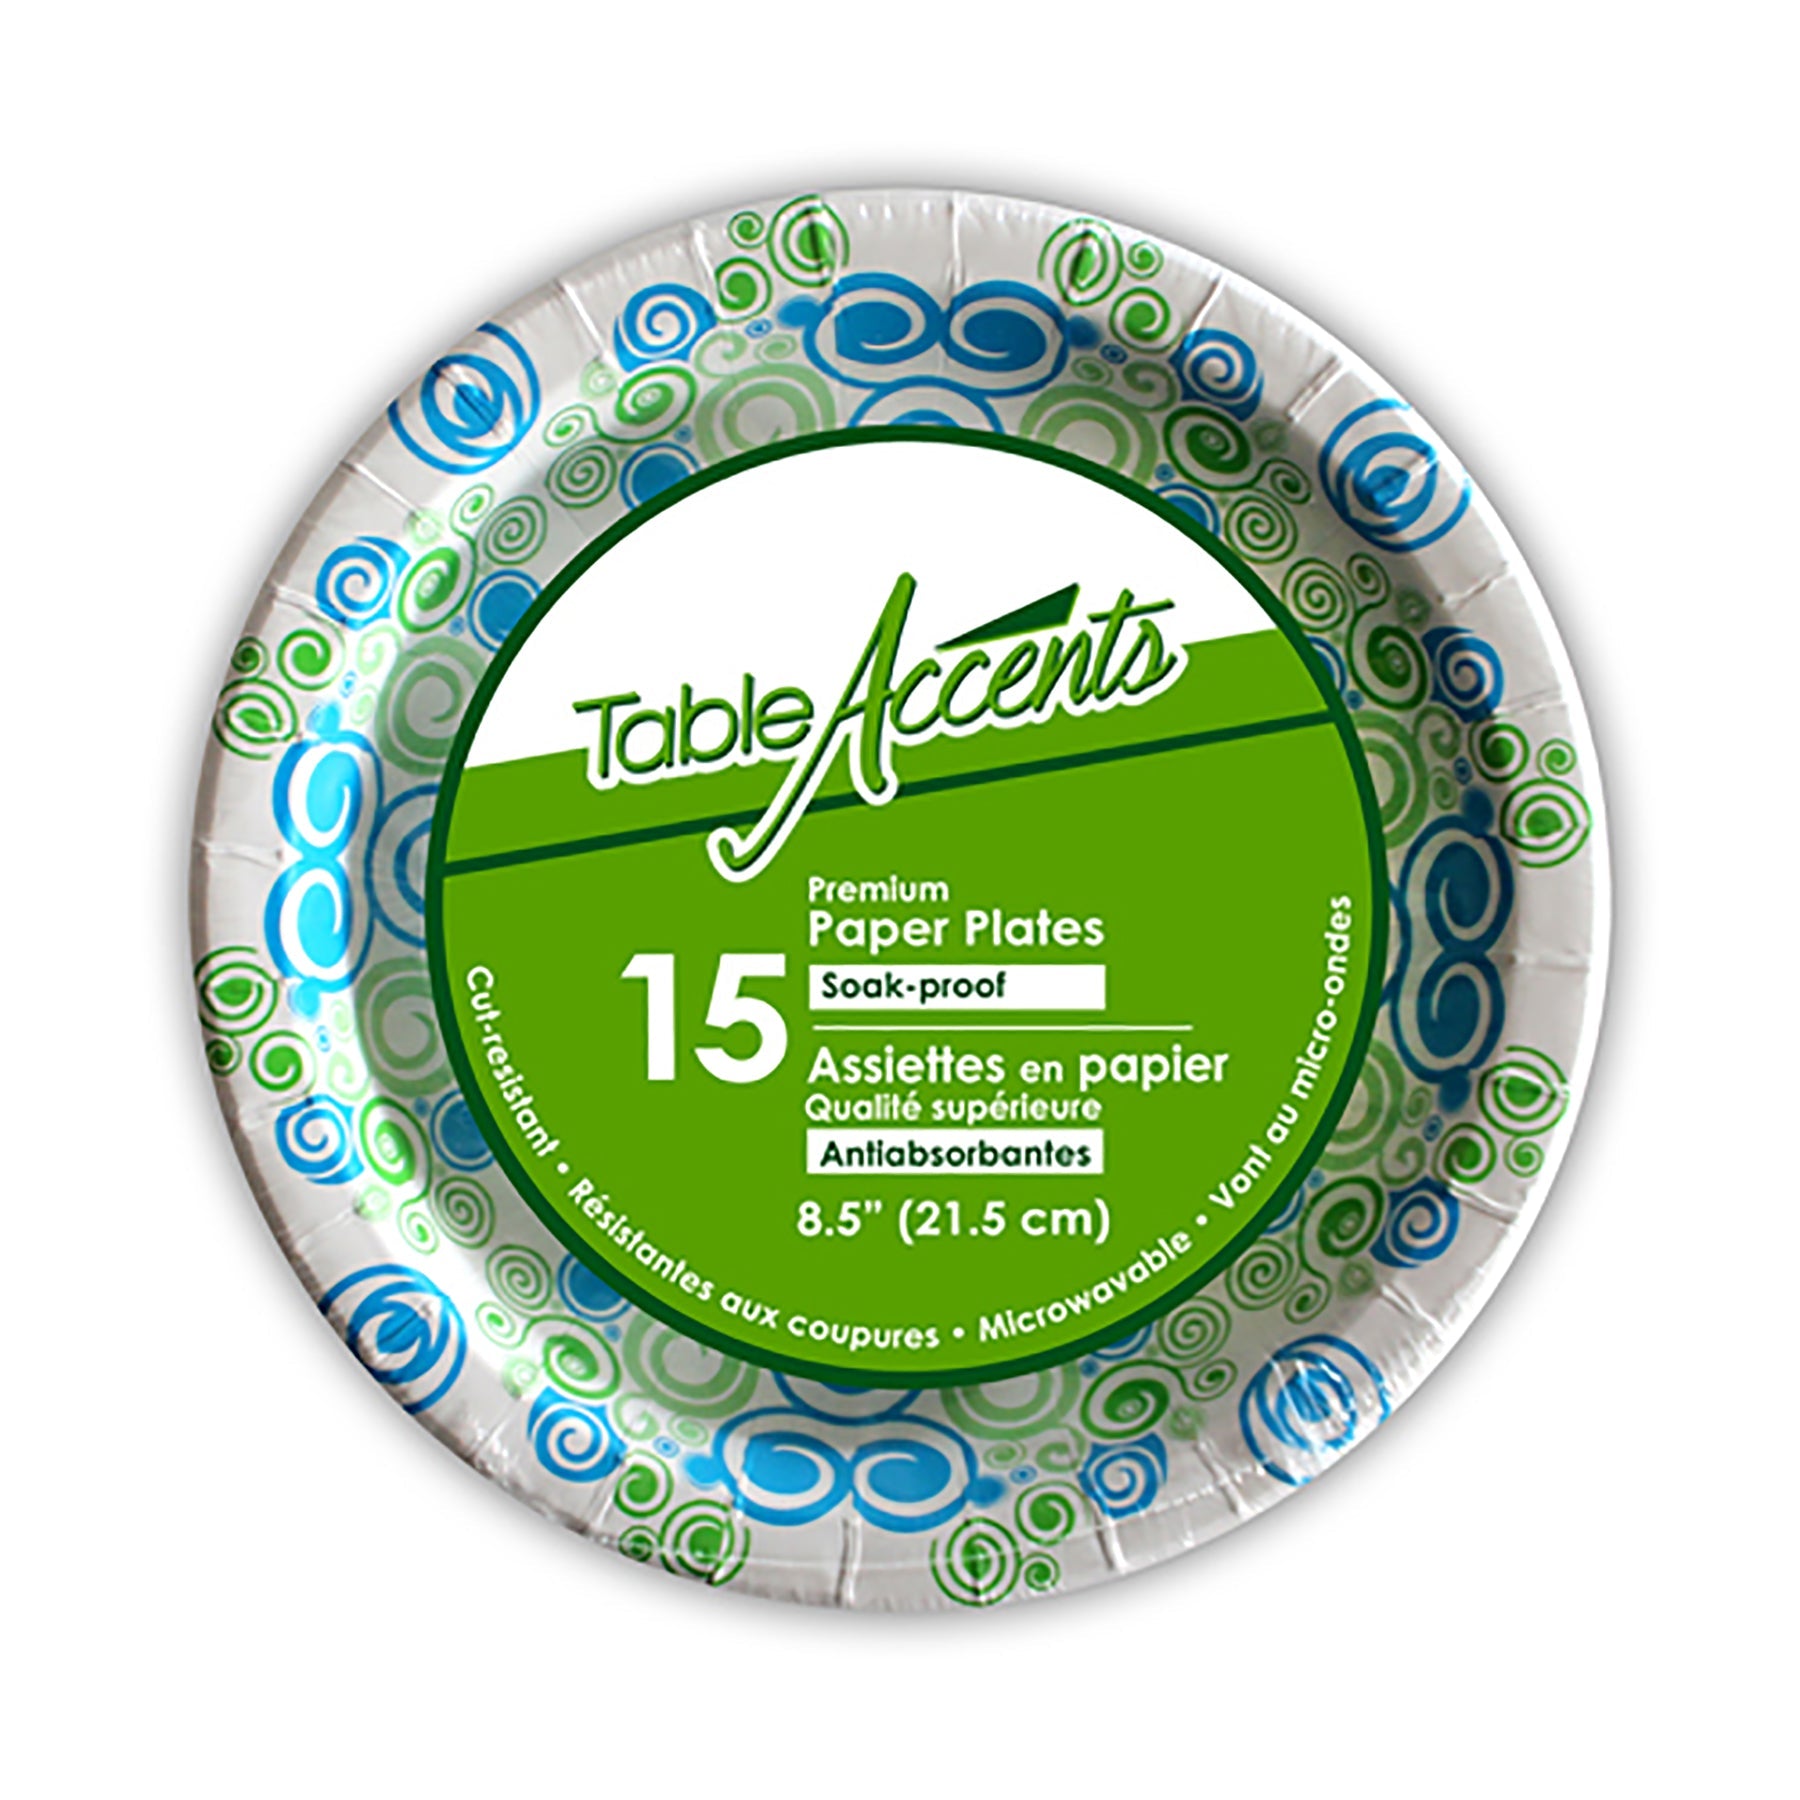 Table Accents 15 Printed Paper Plates 8.5in